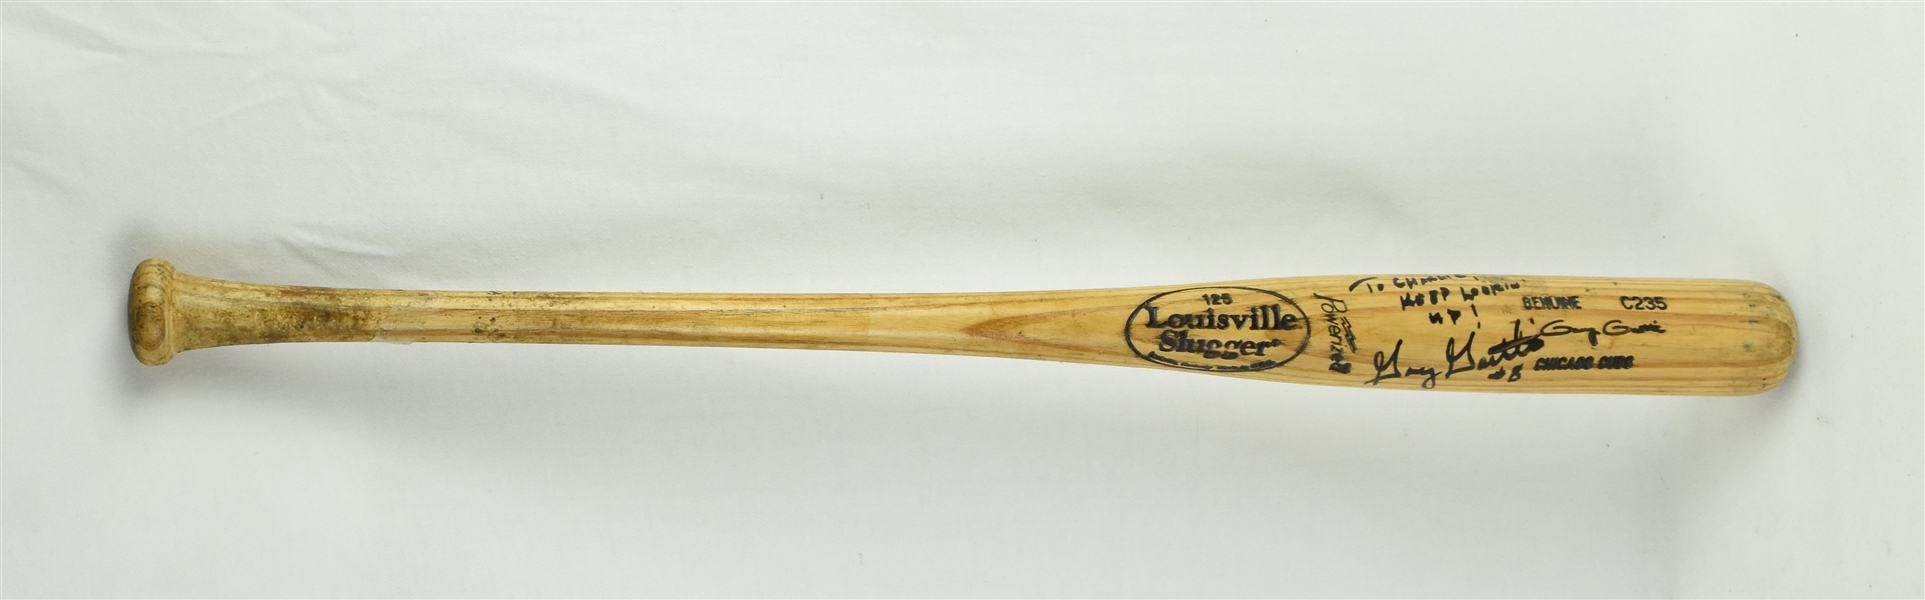 Gary Gaetti Minnesota Twins Game Used Bat Signed & Inscribed to Charlie Sheen